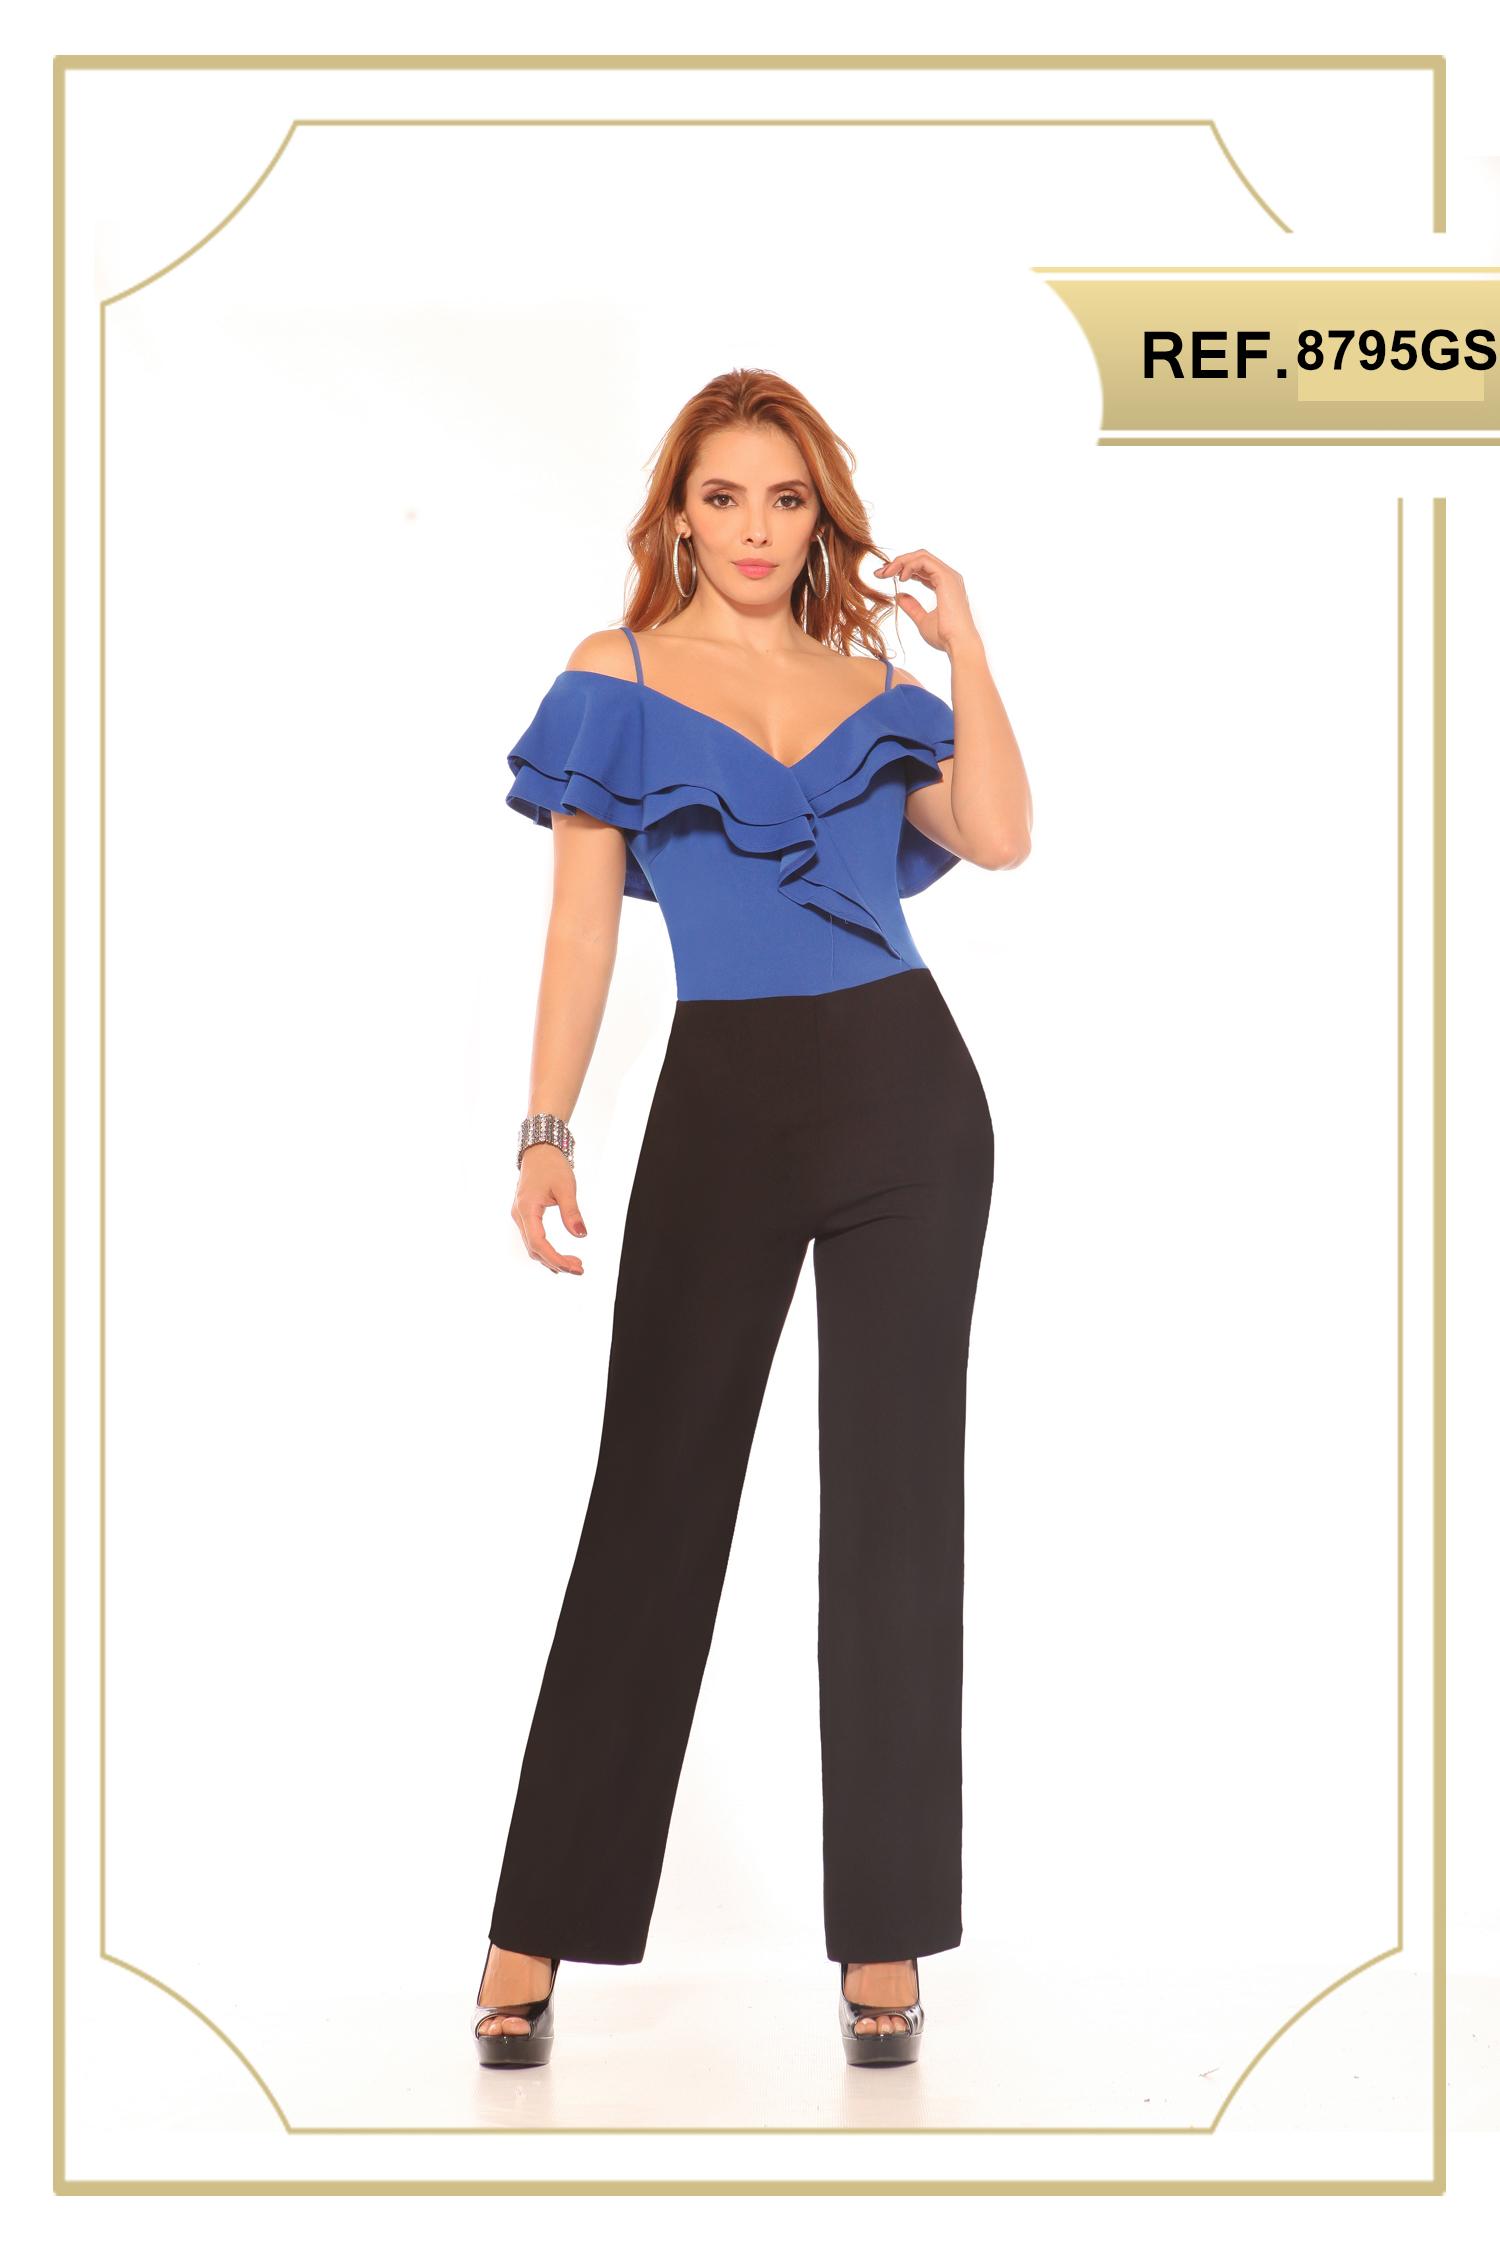 Full-length fabric for lady, with black pants and blue blouse with straps and bare shoulders